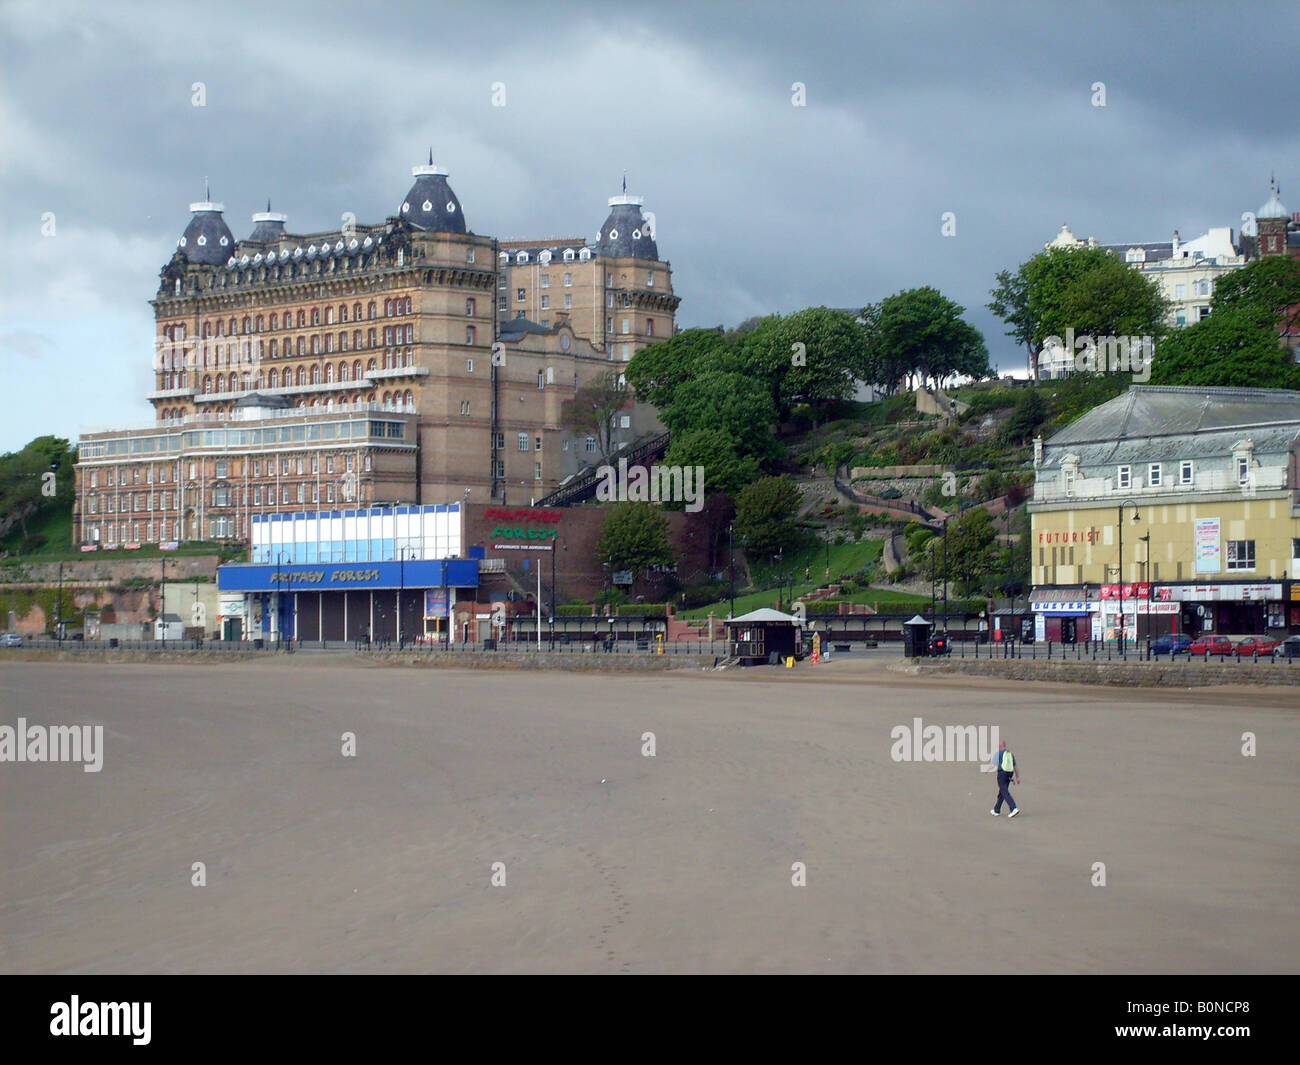 Grand Hotel et South Bay Beach, Scarborough, North Yorkshire, Angleterre Banque D'Images